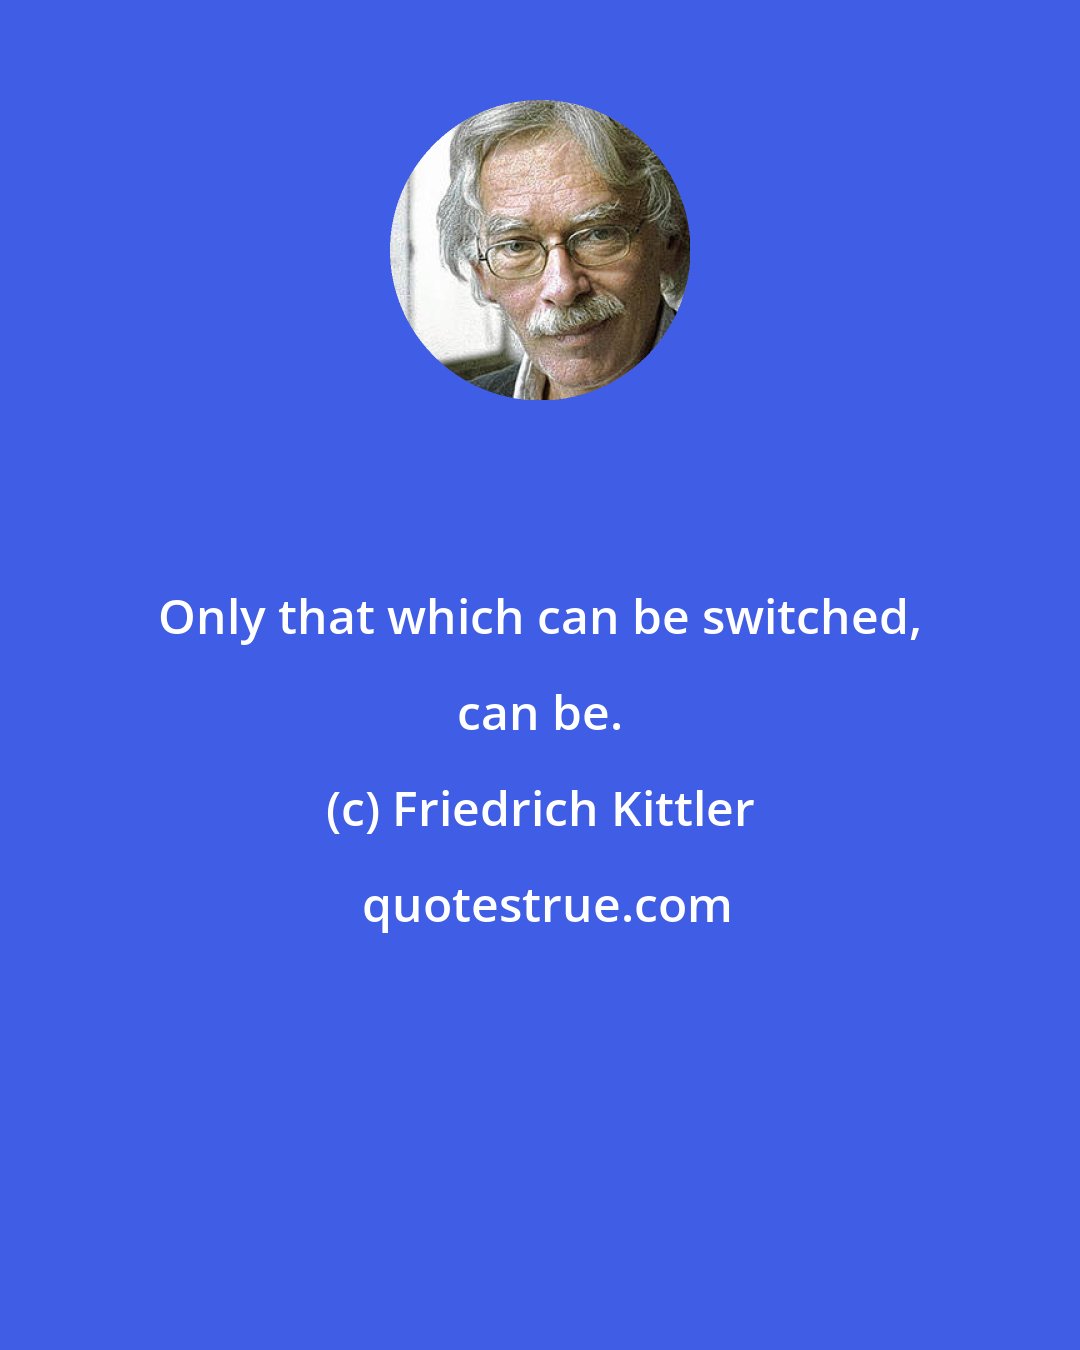 Friedrich Kittler: Only that which can be switched, can be.